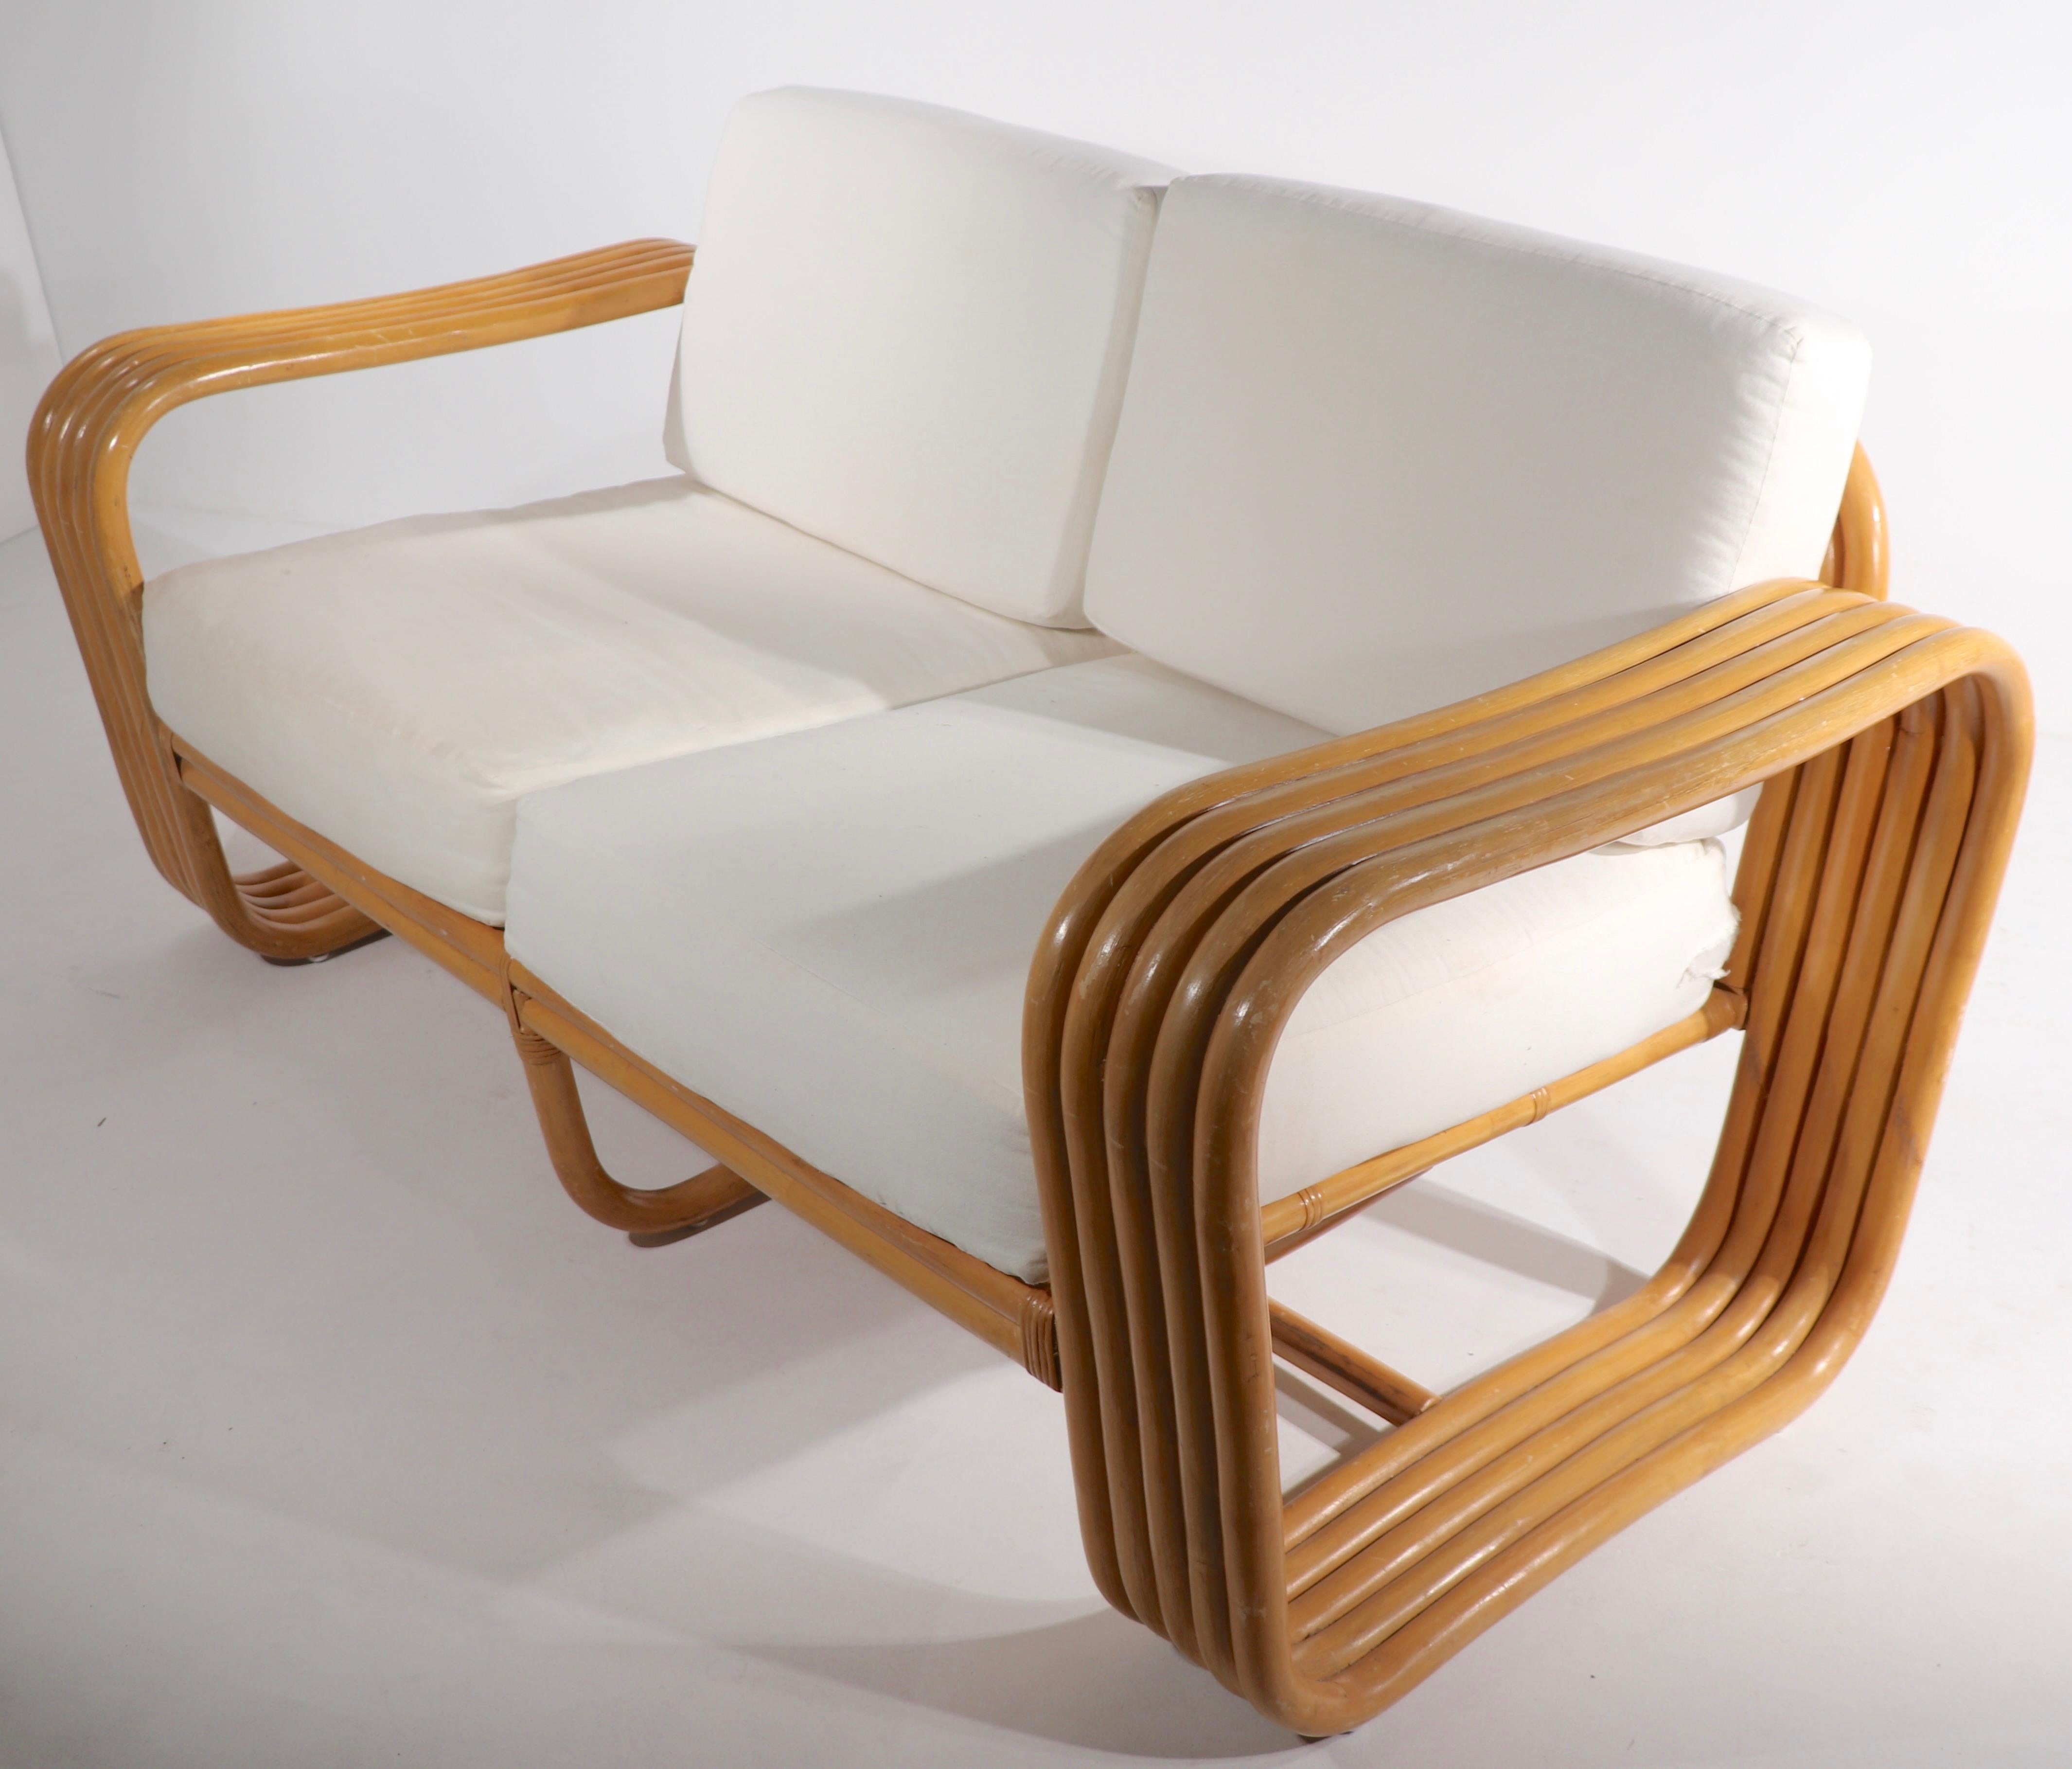 20th Century Art Deco Mid Century Bamboo Sofa Loveseat after Frankl